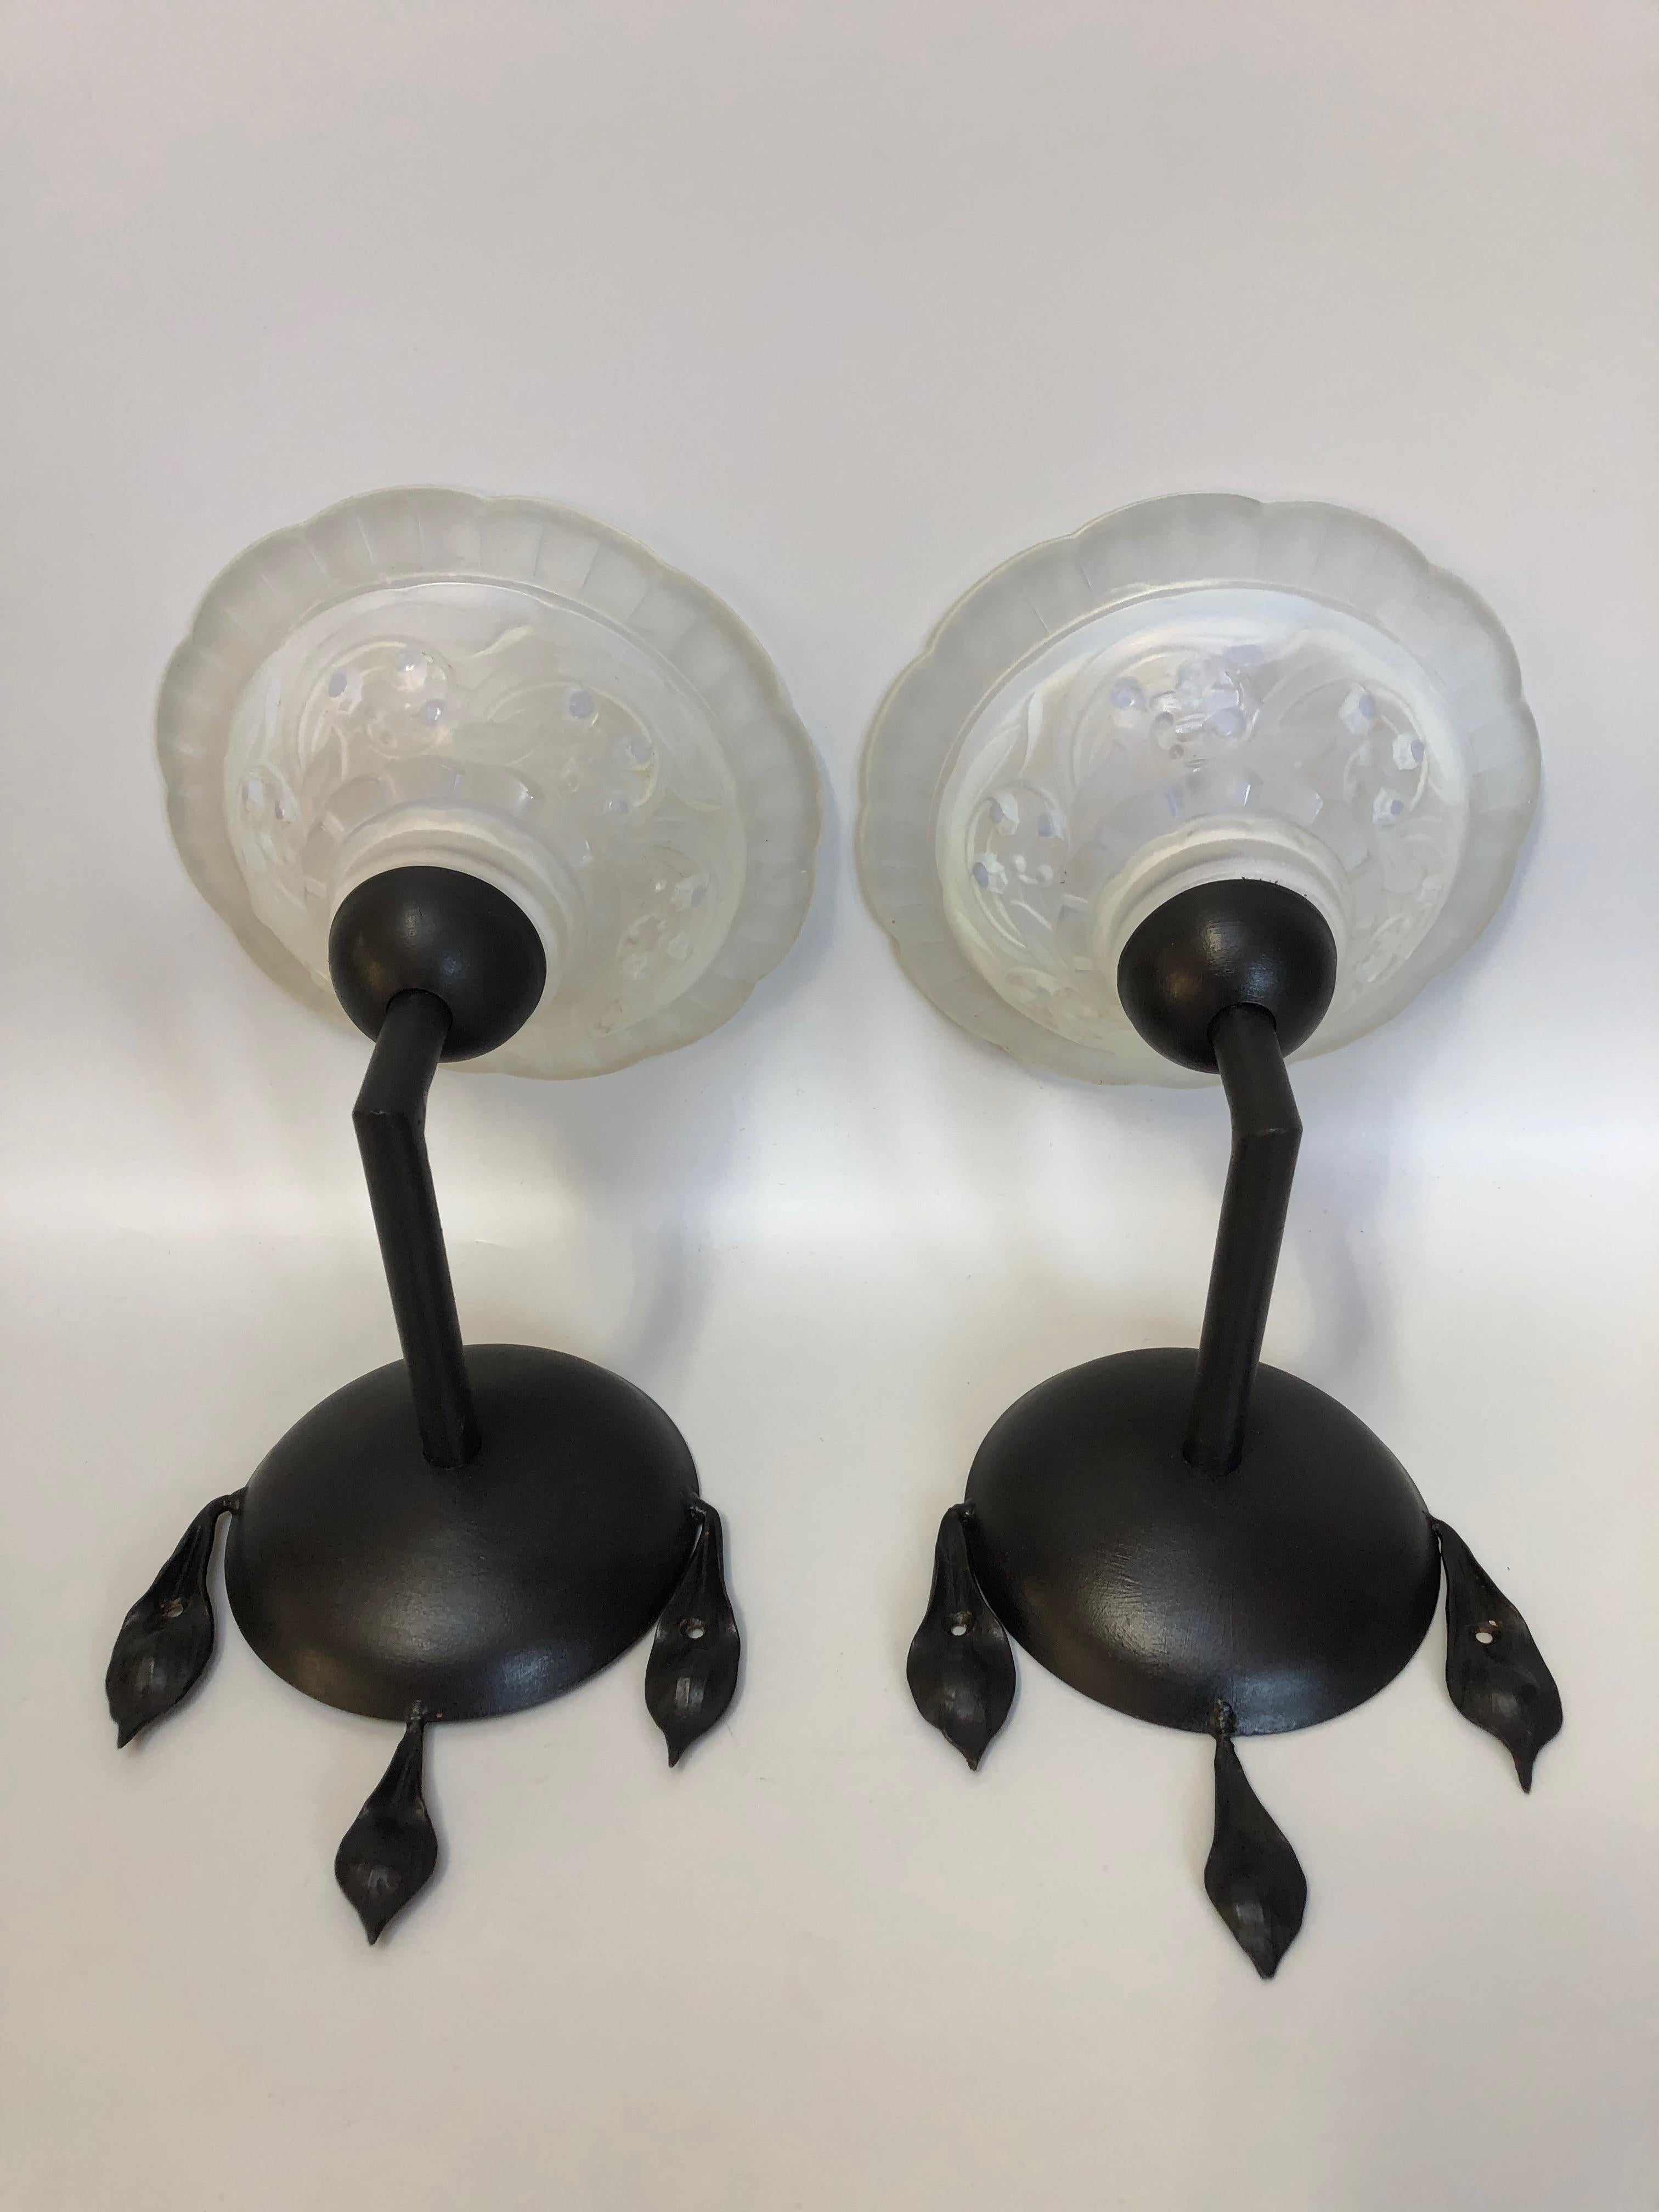 Pair of art deco sconces circa 1930, attributed to Maynadier
Wrought iron frame and opalescent molded glass cup decorated with lily of the valley.

Total height: 24cm
Width: 18cm
Depth: 23cm
Tulip diameter: 18 cm
Weight: 2.1 Kg